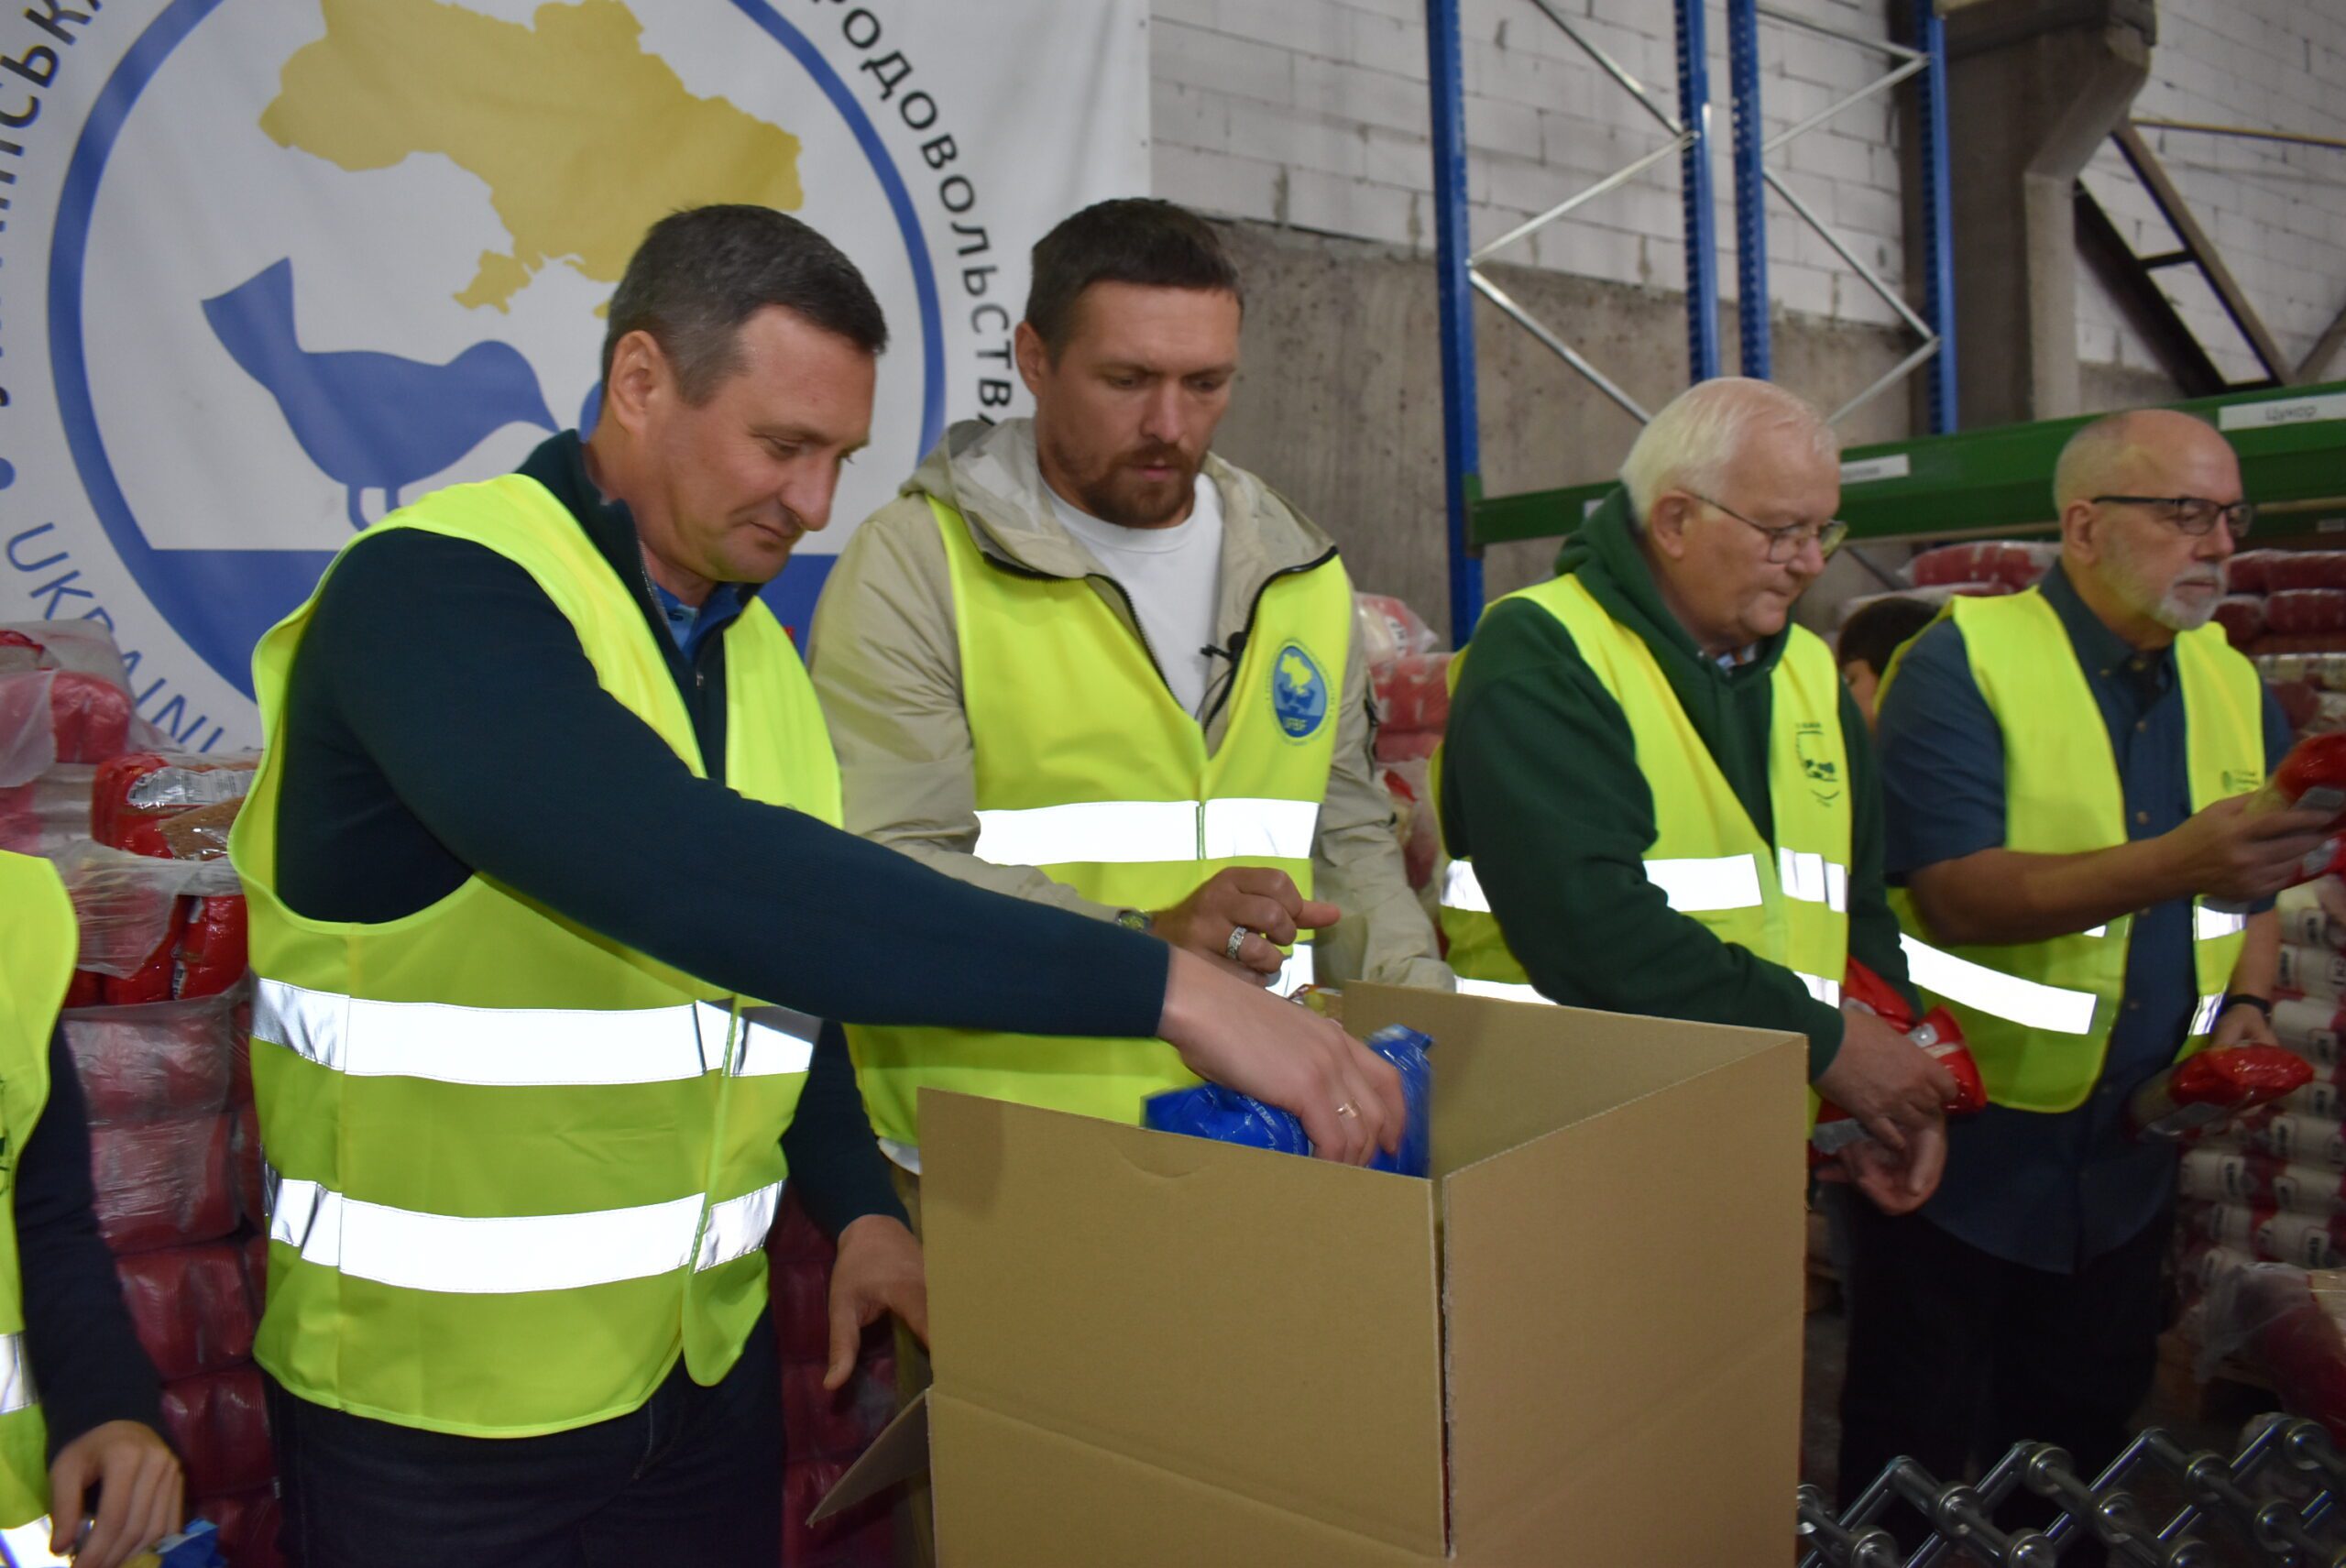 Dmytro Shkrabatovskyi, board chair of the Ukrainian Food Banks Federation; Oleksandr Usyk, a world championship Ukrainian boxer; Jacques Vandenschrik, GFN Board member and president of European Food Banks Federation; and Christopher Rebstock, GFN’s Canada, Europe, and South Asia program director, packed food kits for Irpin, Bucha, and surrounding communities. (Photo: Ukrainian Food Banks Federation)